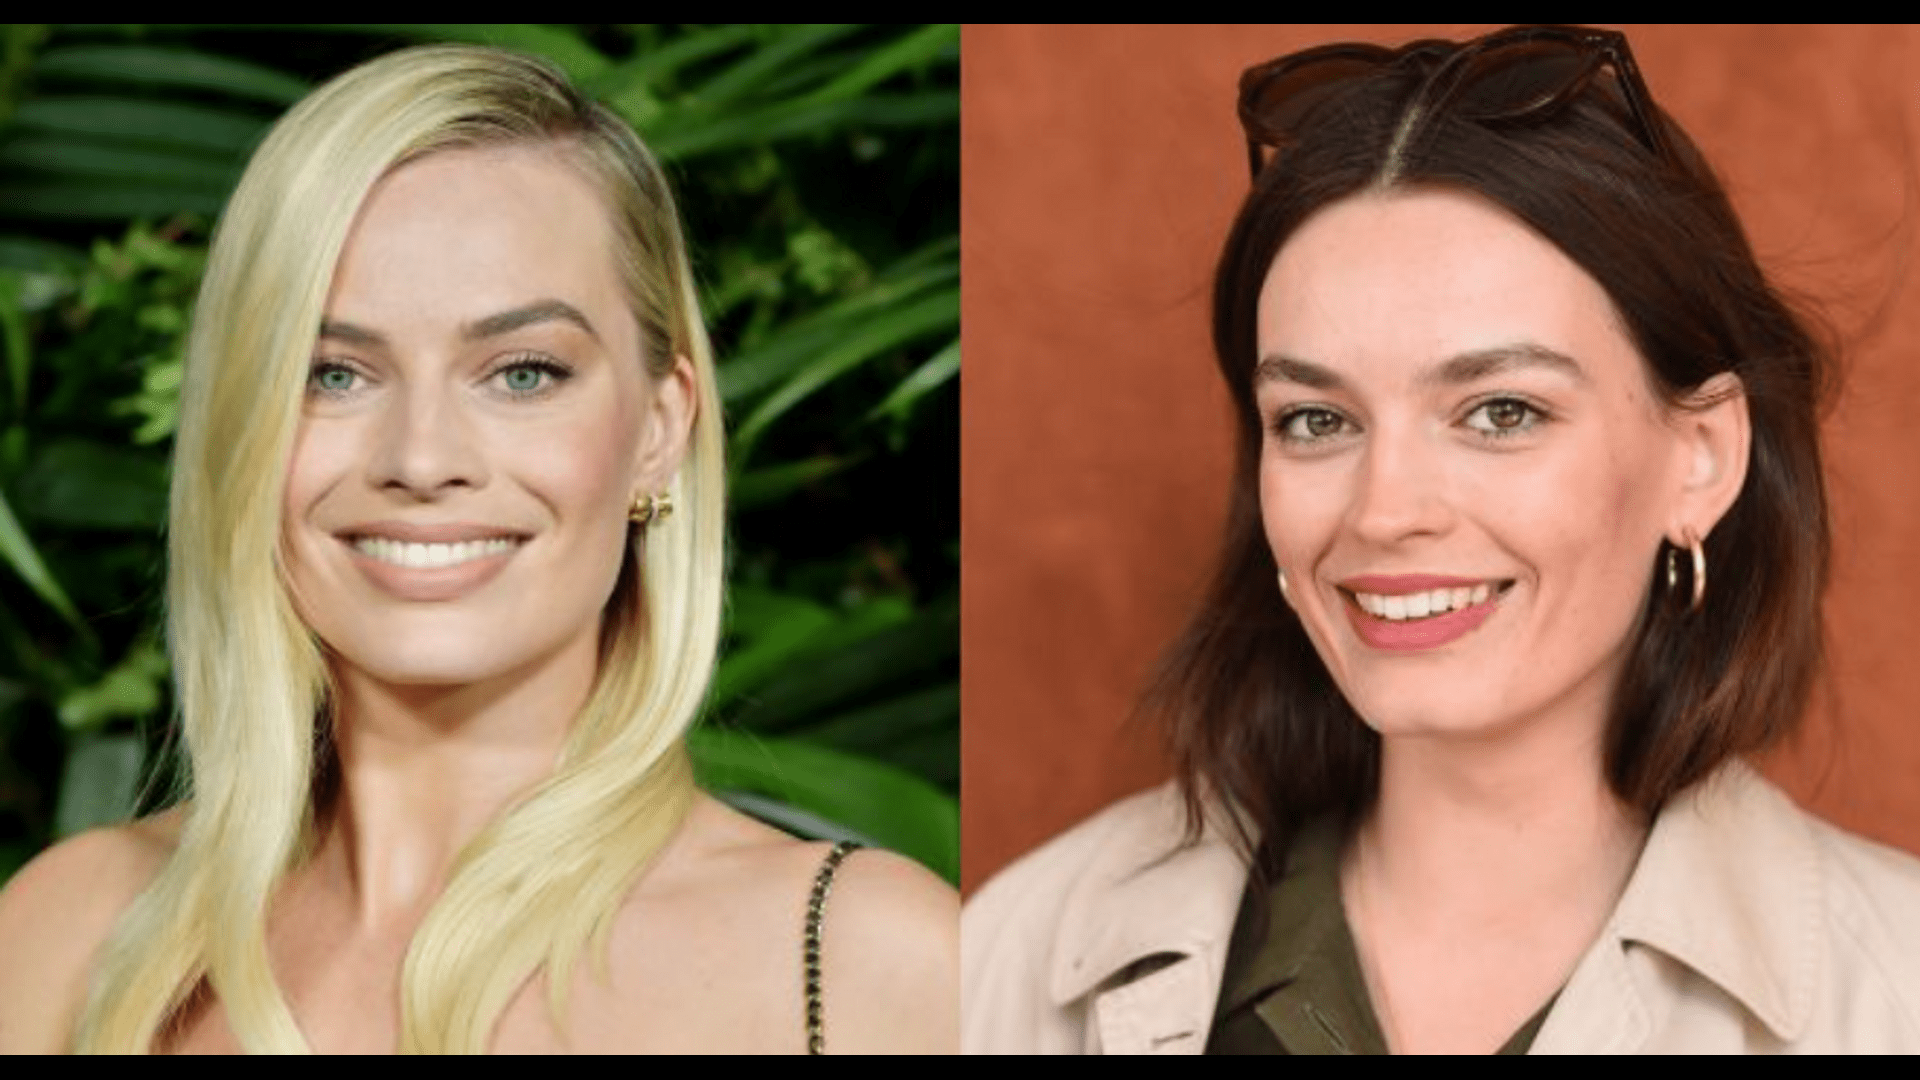 margot-robbie-and-emma-mackey-will-be-together-in-the-barbie-movie